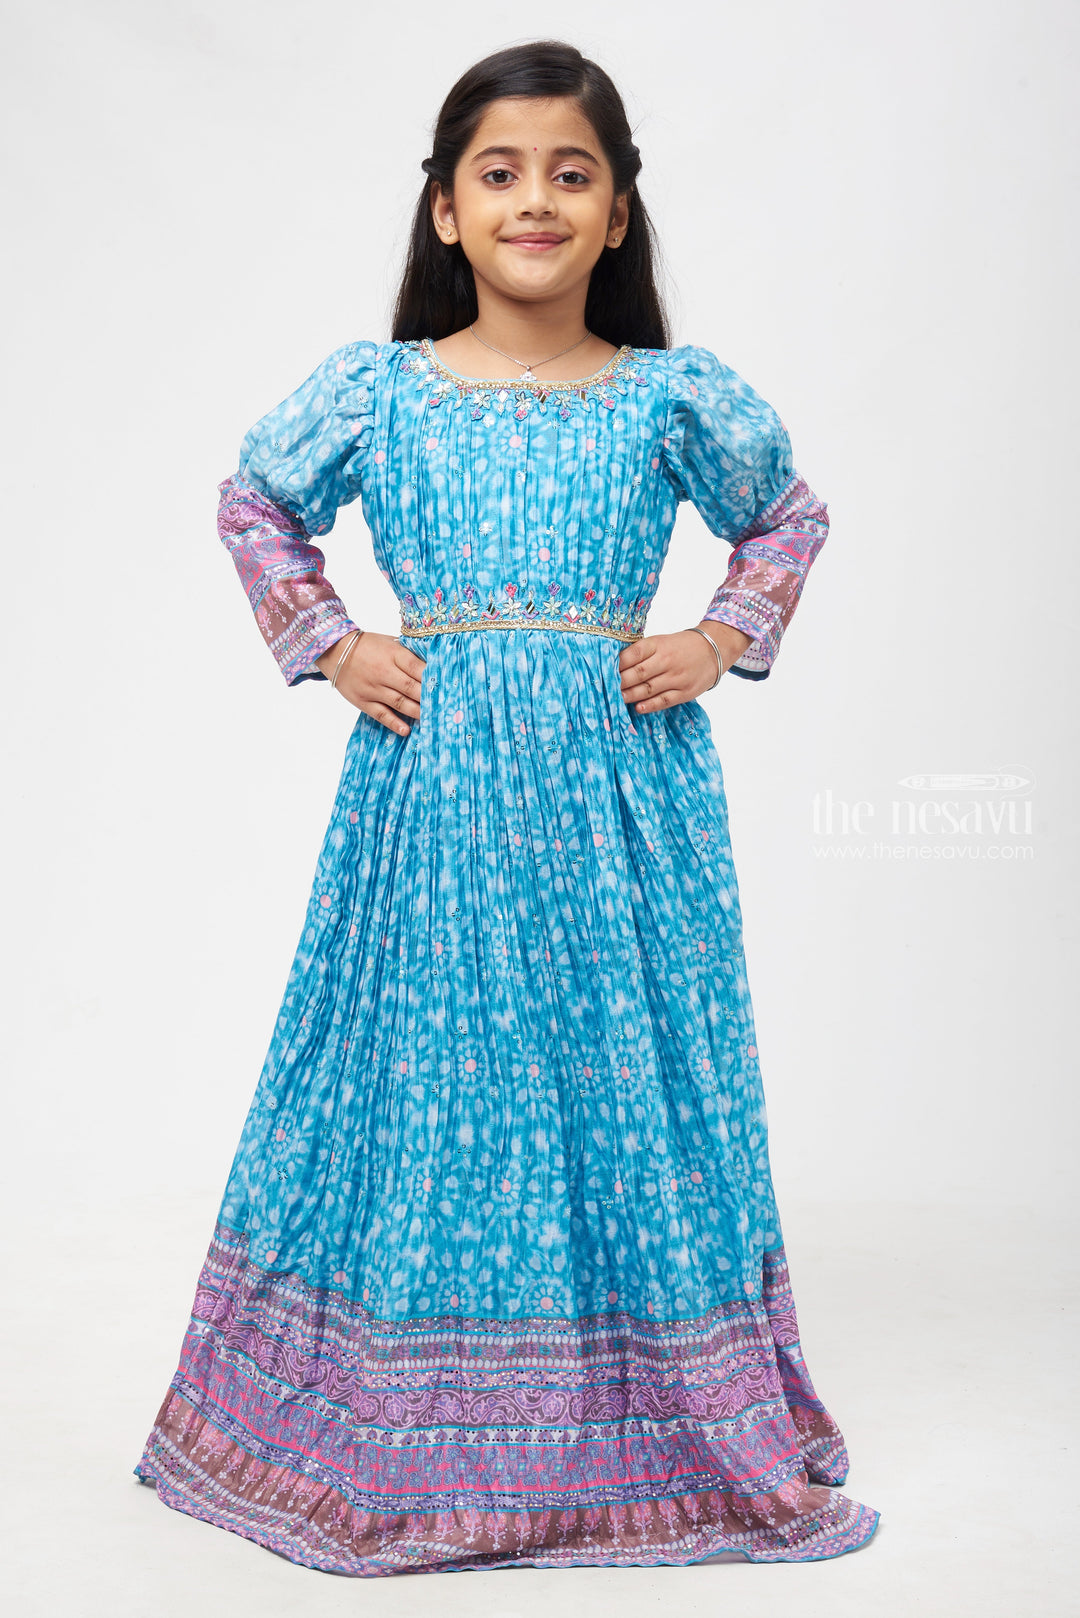 The Nesavu Girls Party Gown Azure Blooms: Stone Embroidered Floral Blue Anarkali for Girls- Premium Designer Dress Collections Nesavu 24 (5Y) / Green / Chinnon GA169A-24 Festive Diwali Anarkali Outfit | Kid’s Stylish Anarkali Dress | The Nesavu